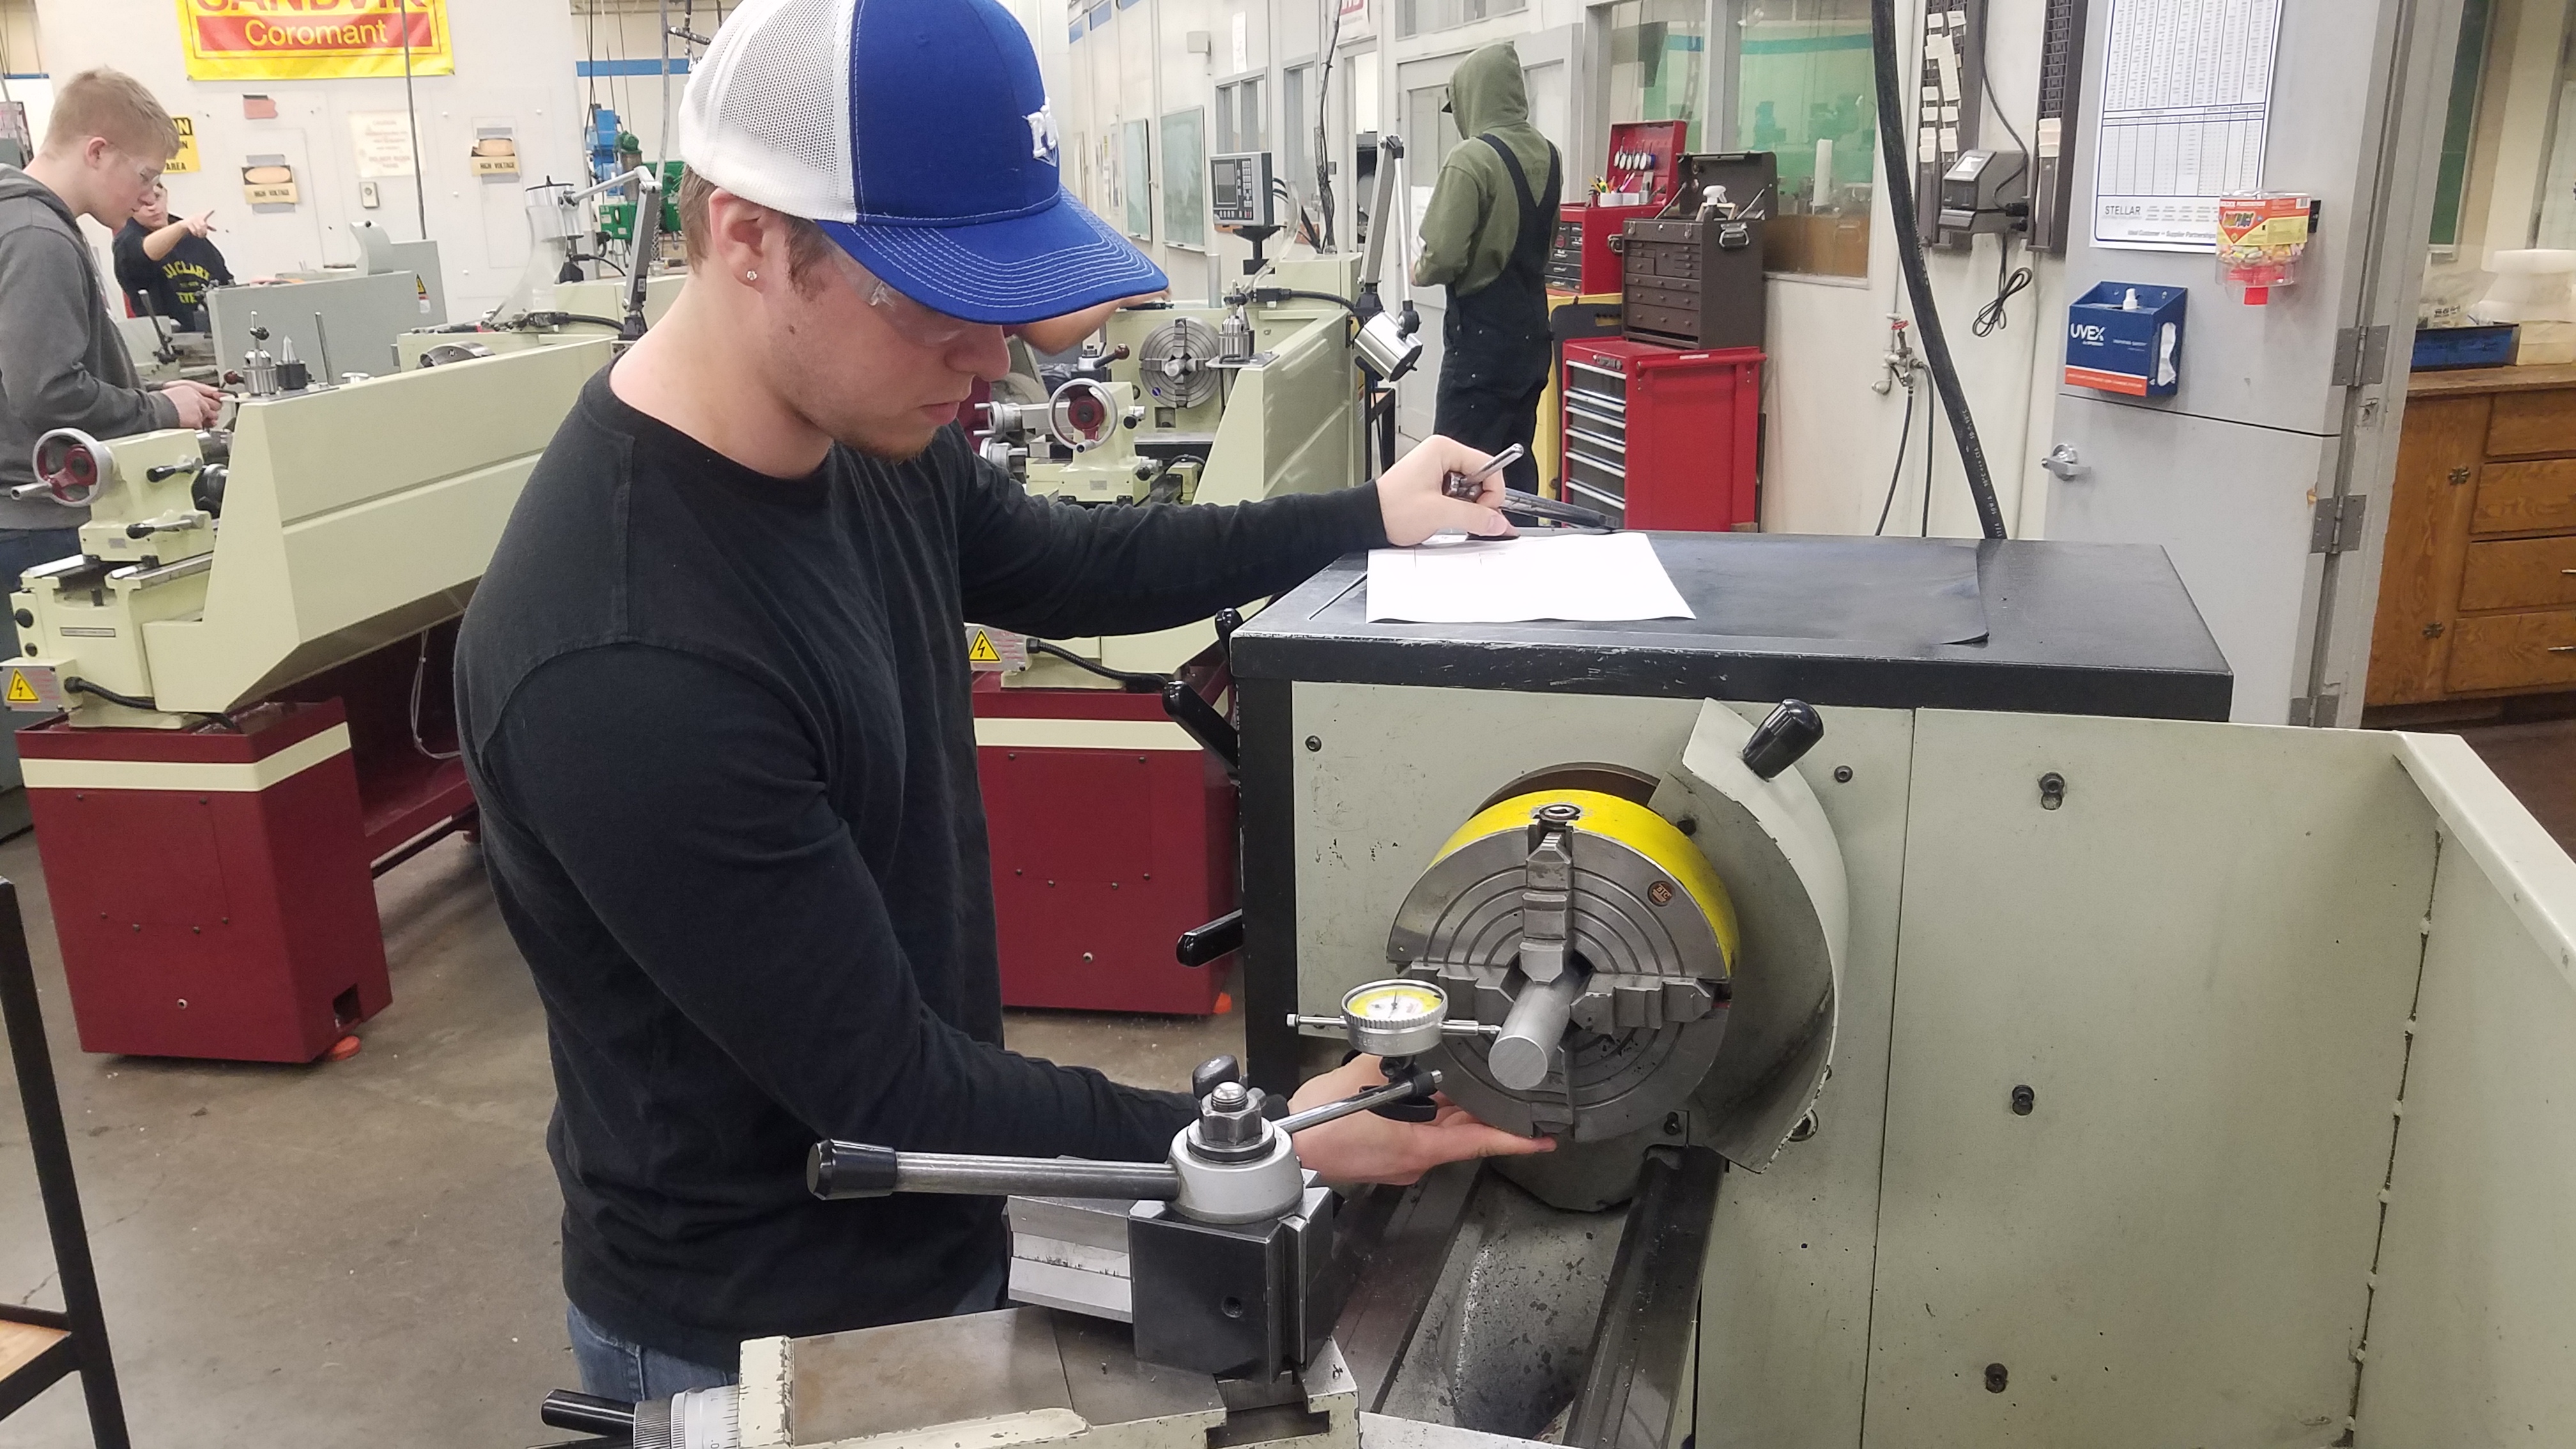 Students using lathes in the classroom